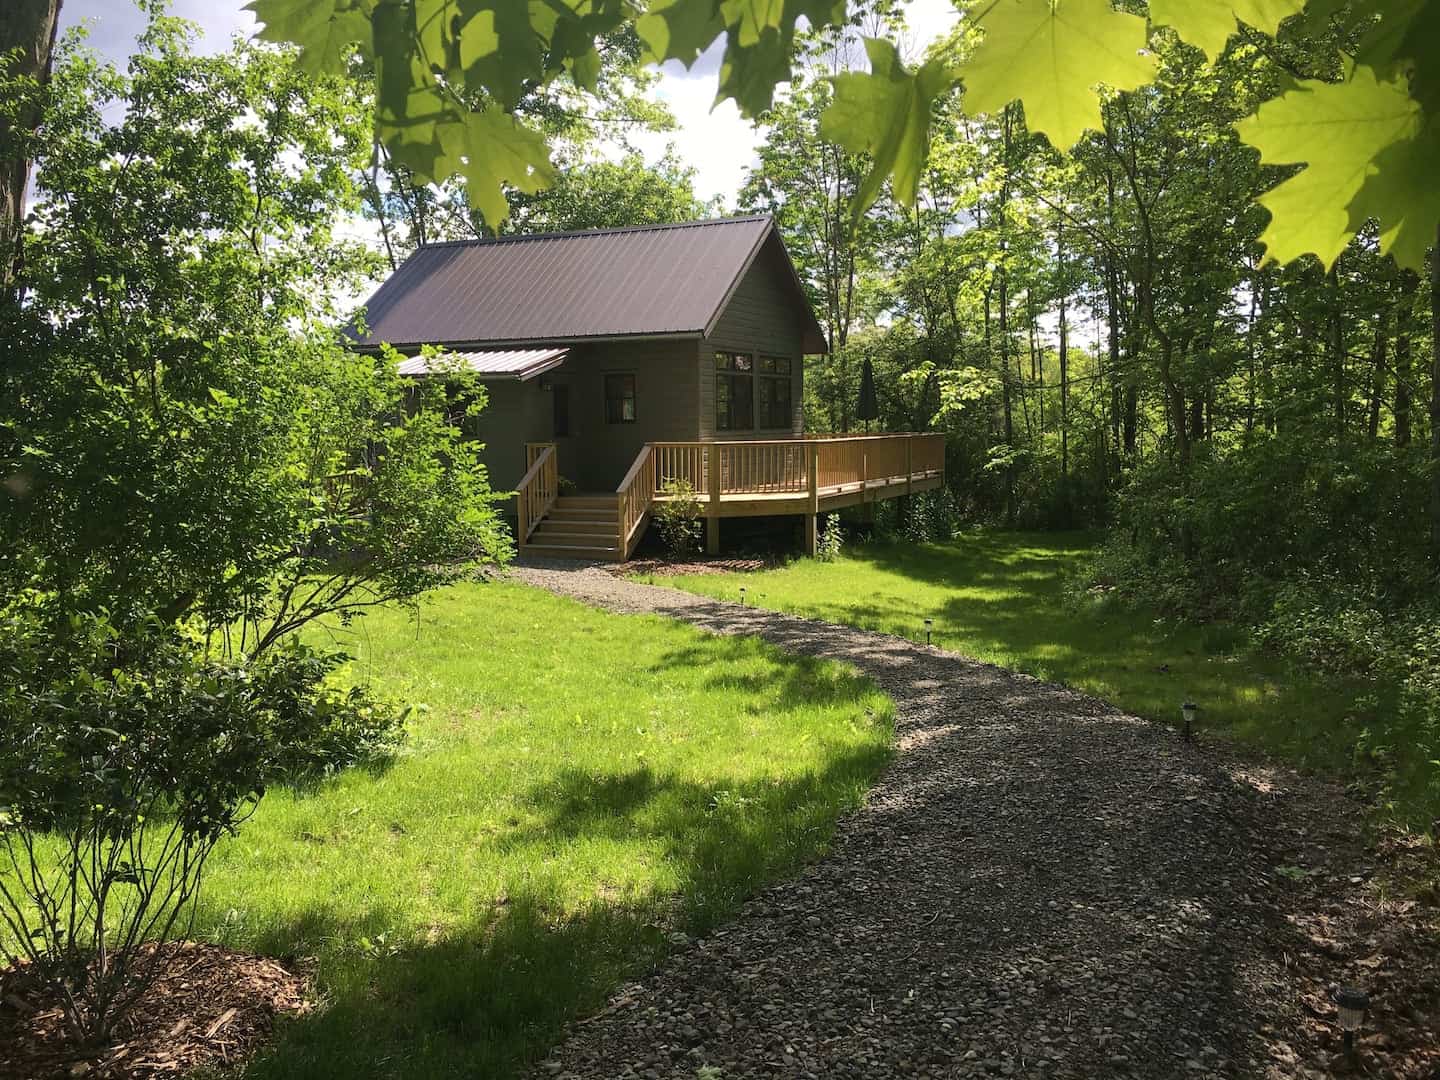 Image of Airbnb rental in Ithaca, New York